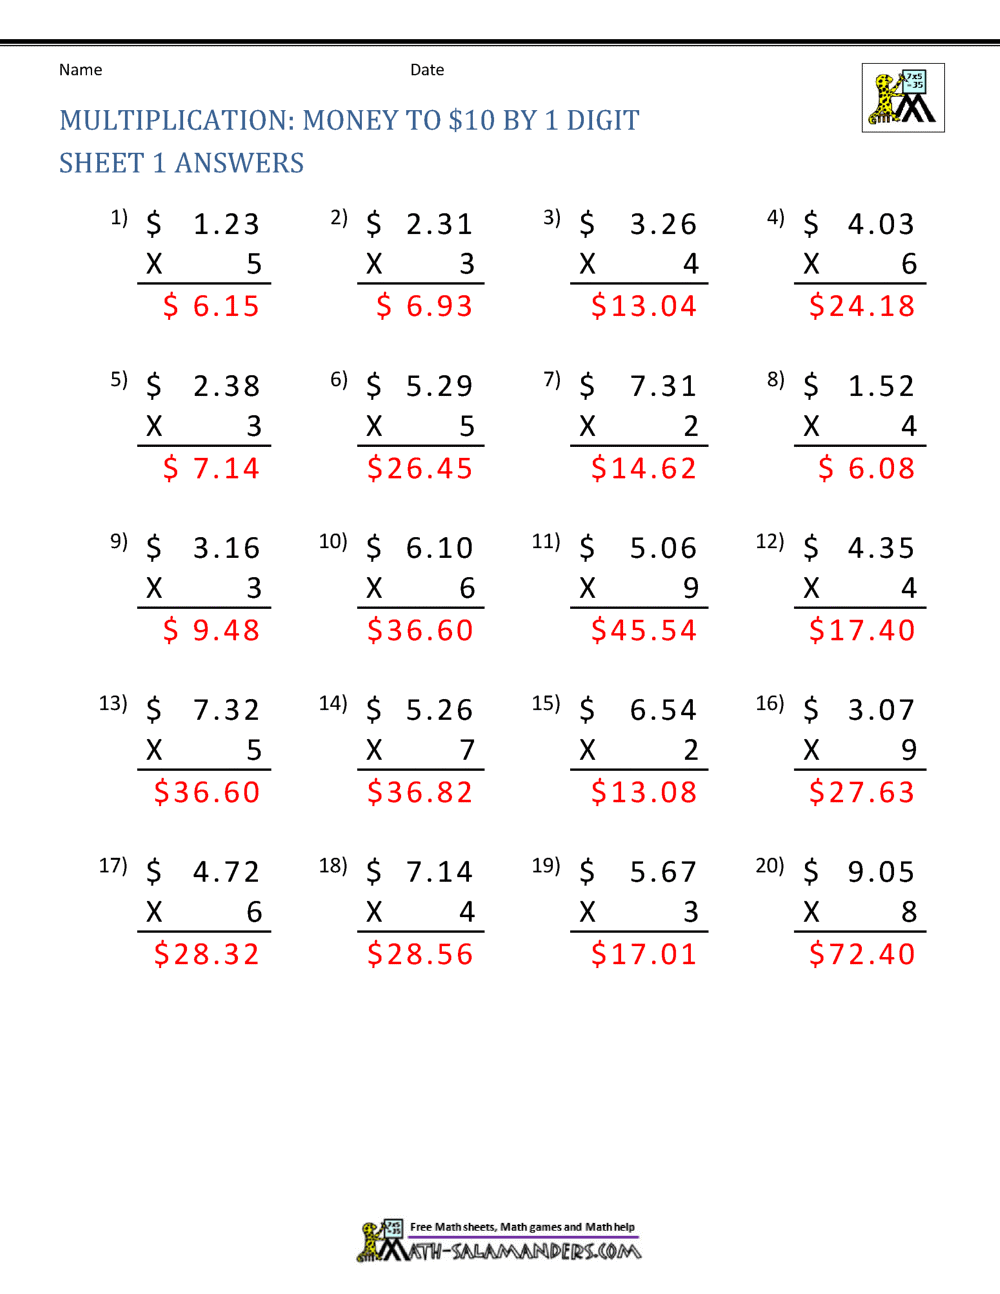 Multiplication Money to $10 by 1 Digit Sheet 2 Sheet 2 Answers PDF version